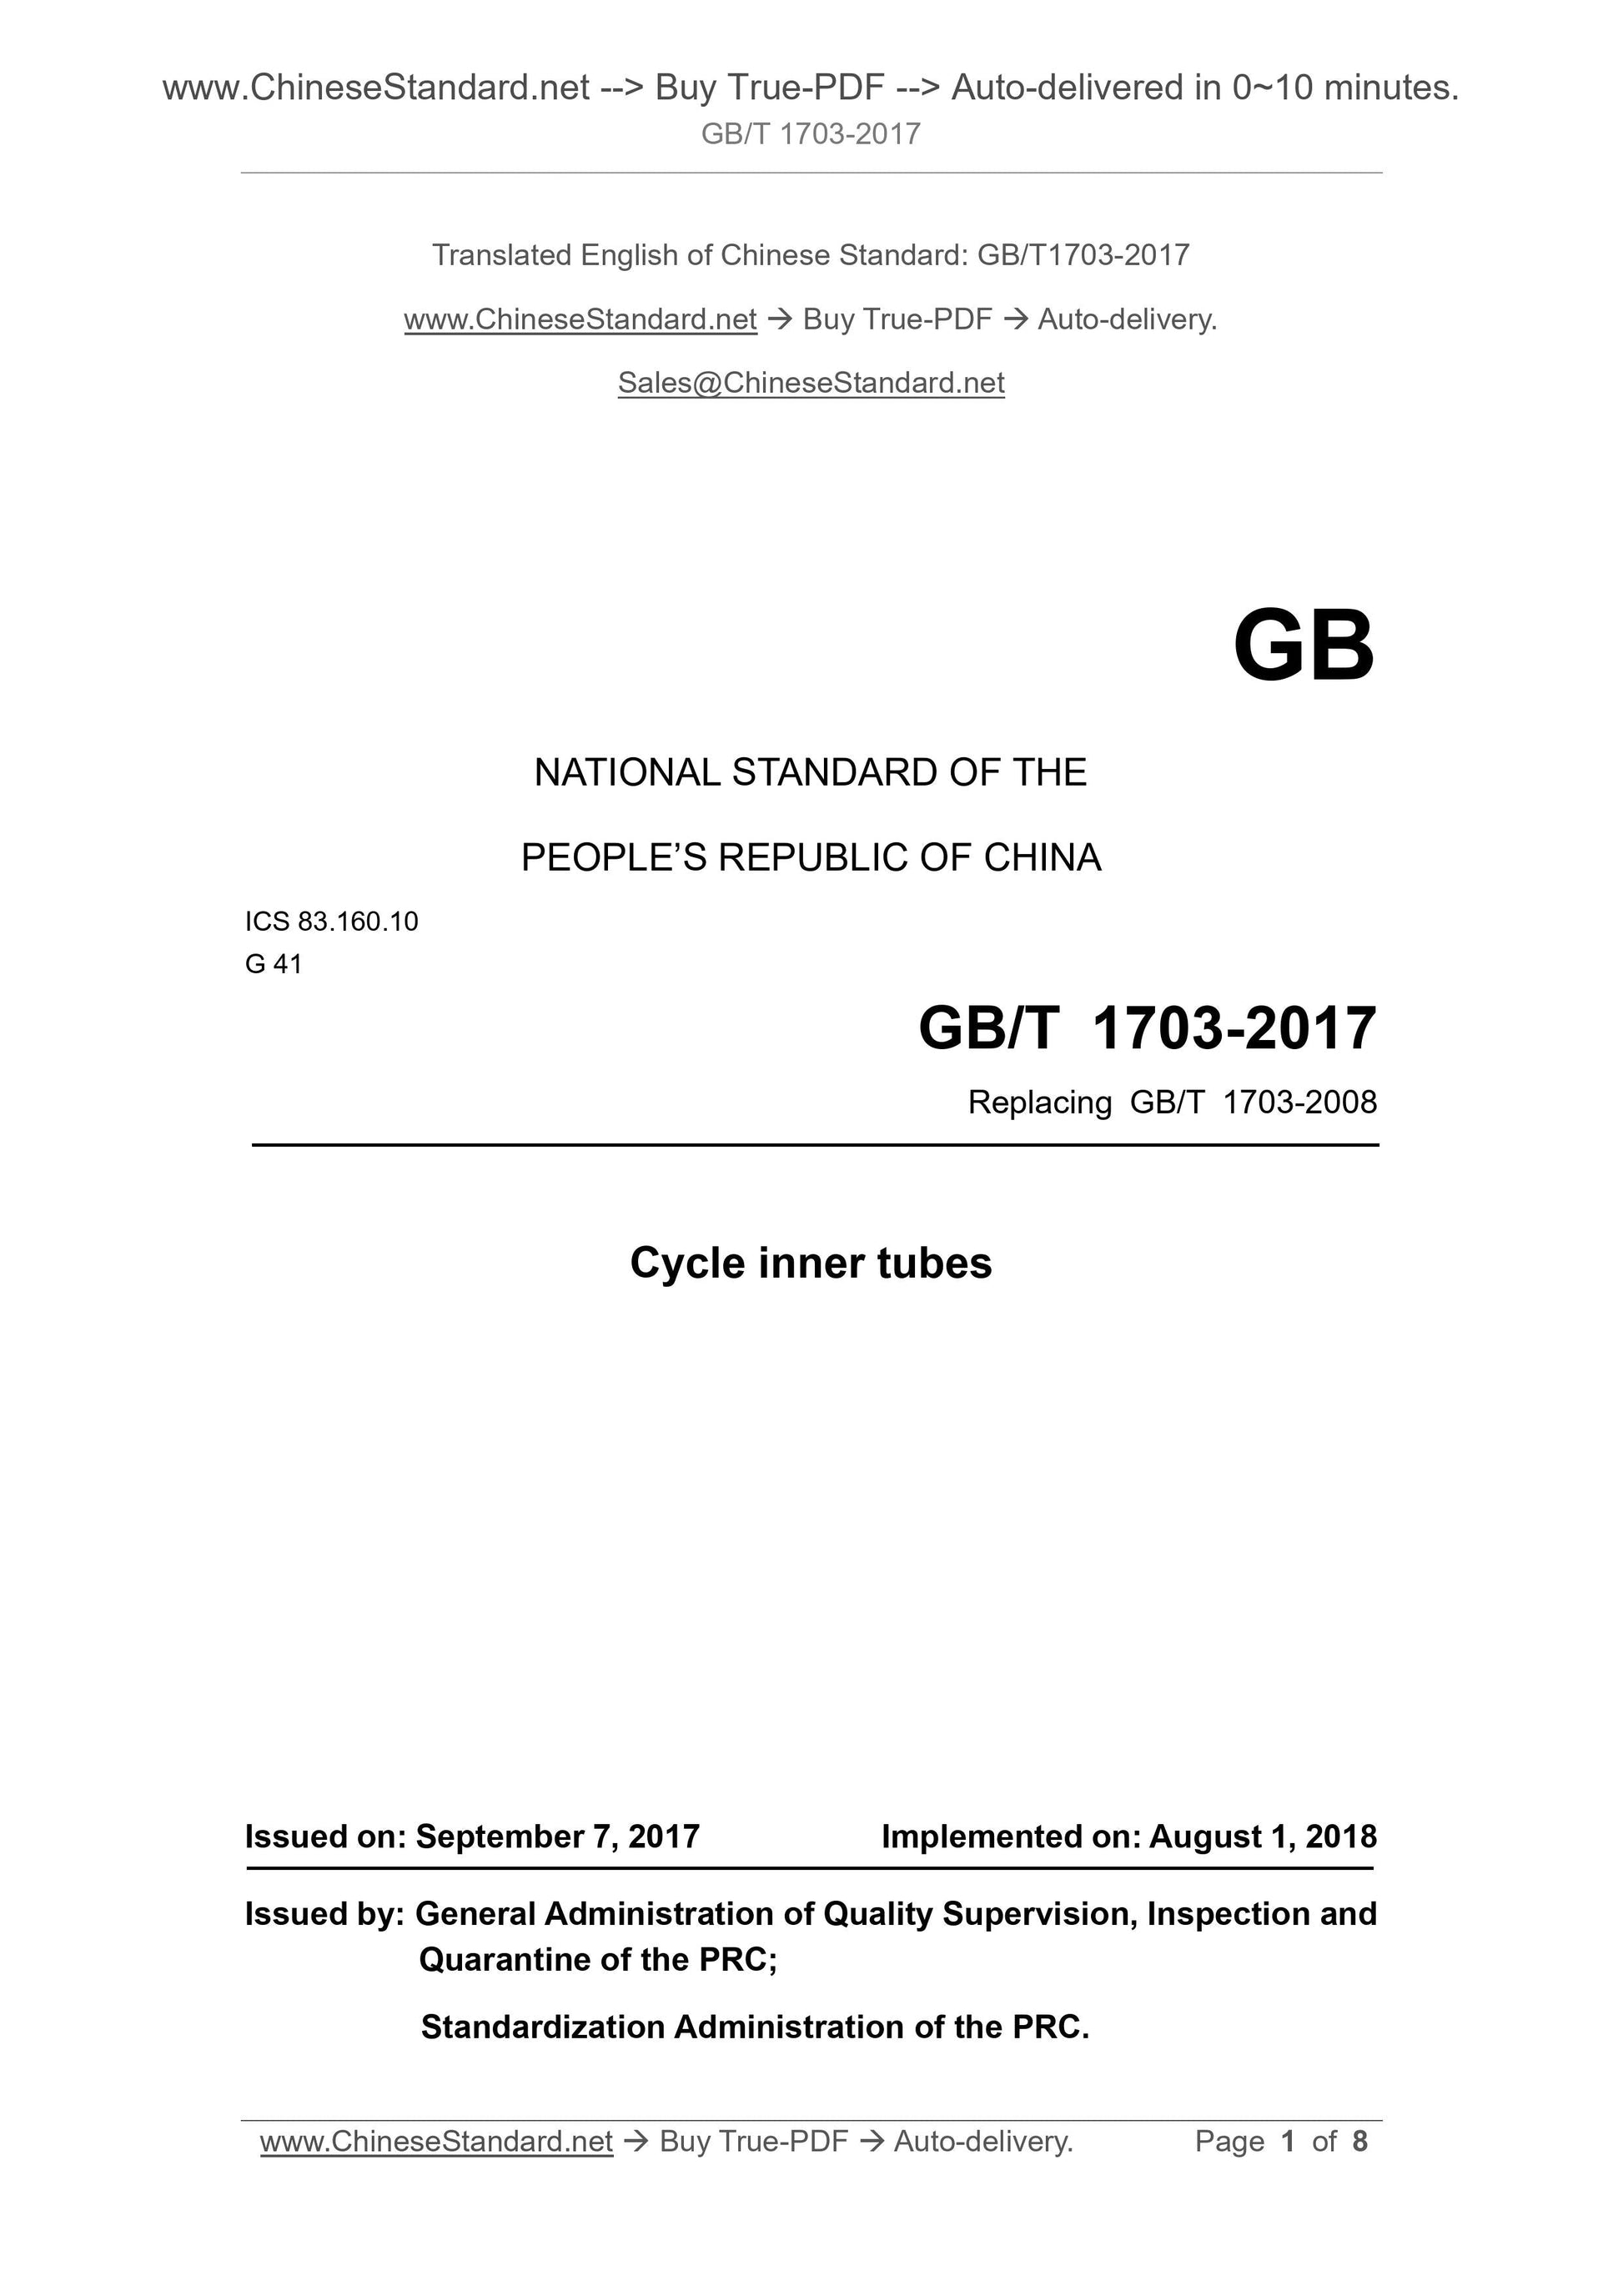 GB/T 1703-2017 Page 1